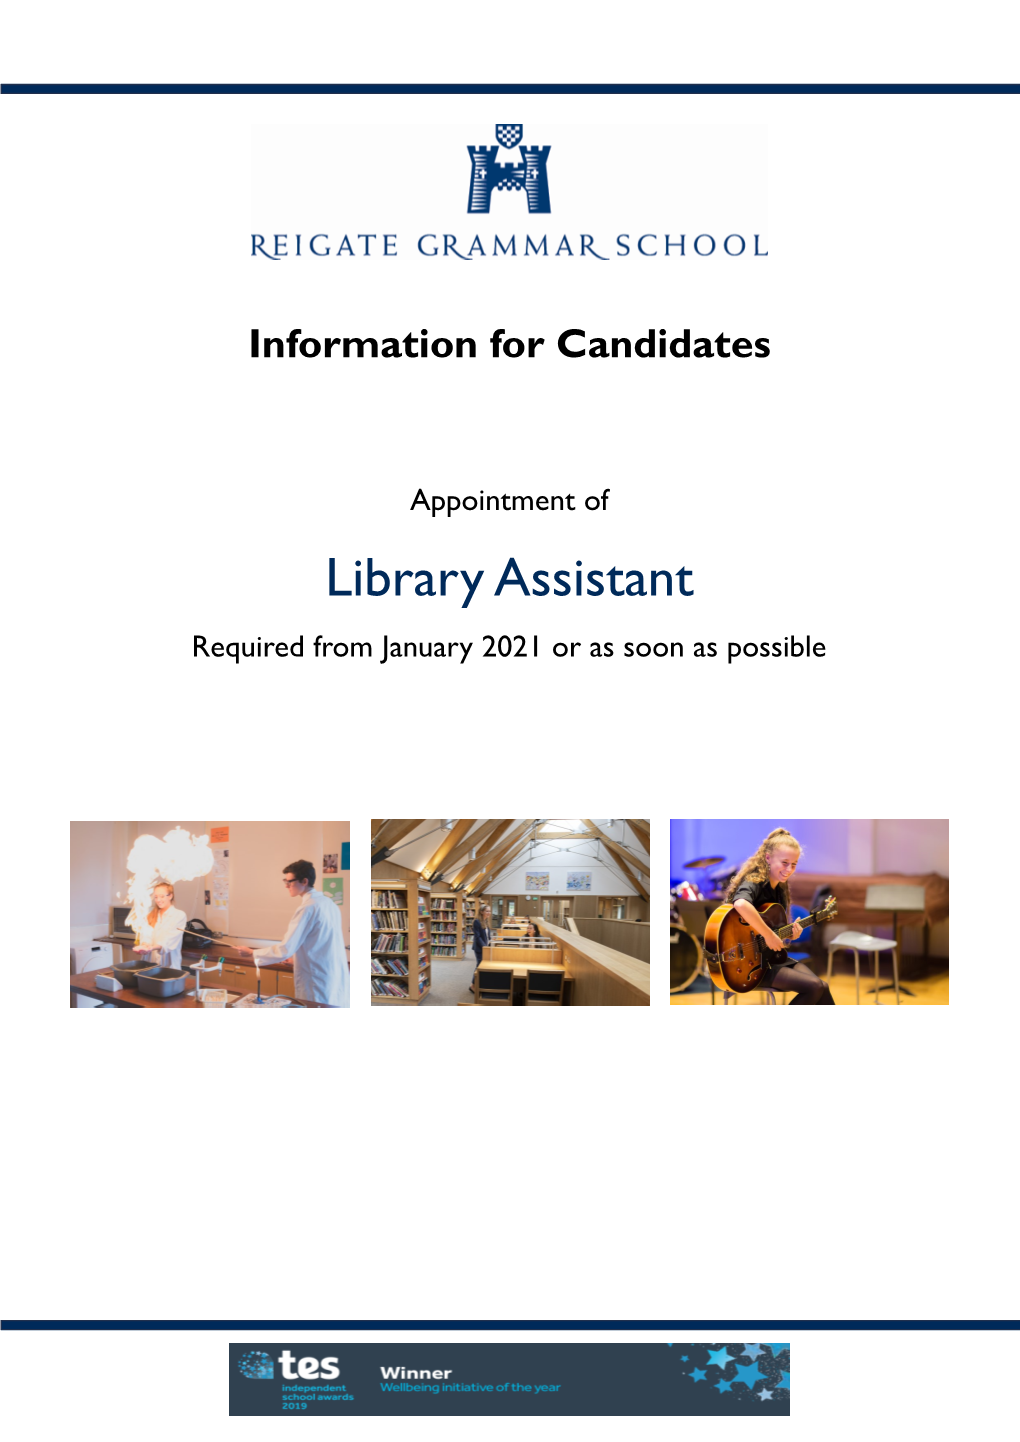 Library Assistant Required from January 2021 Or As Soon As Possible